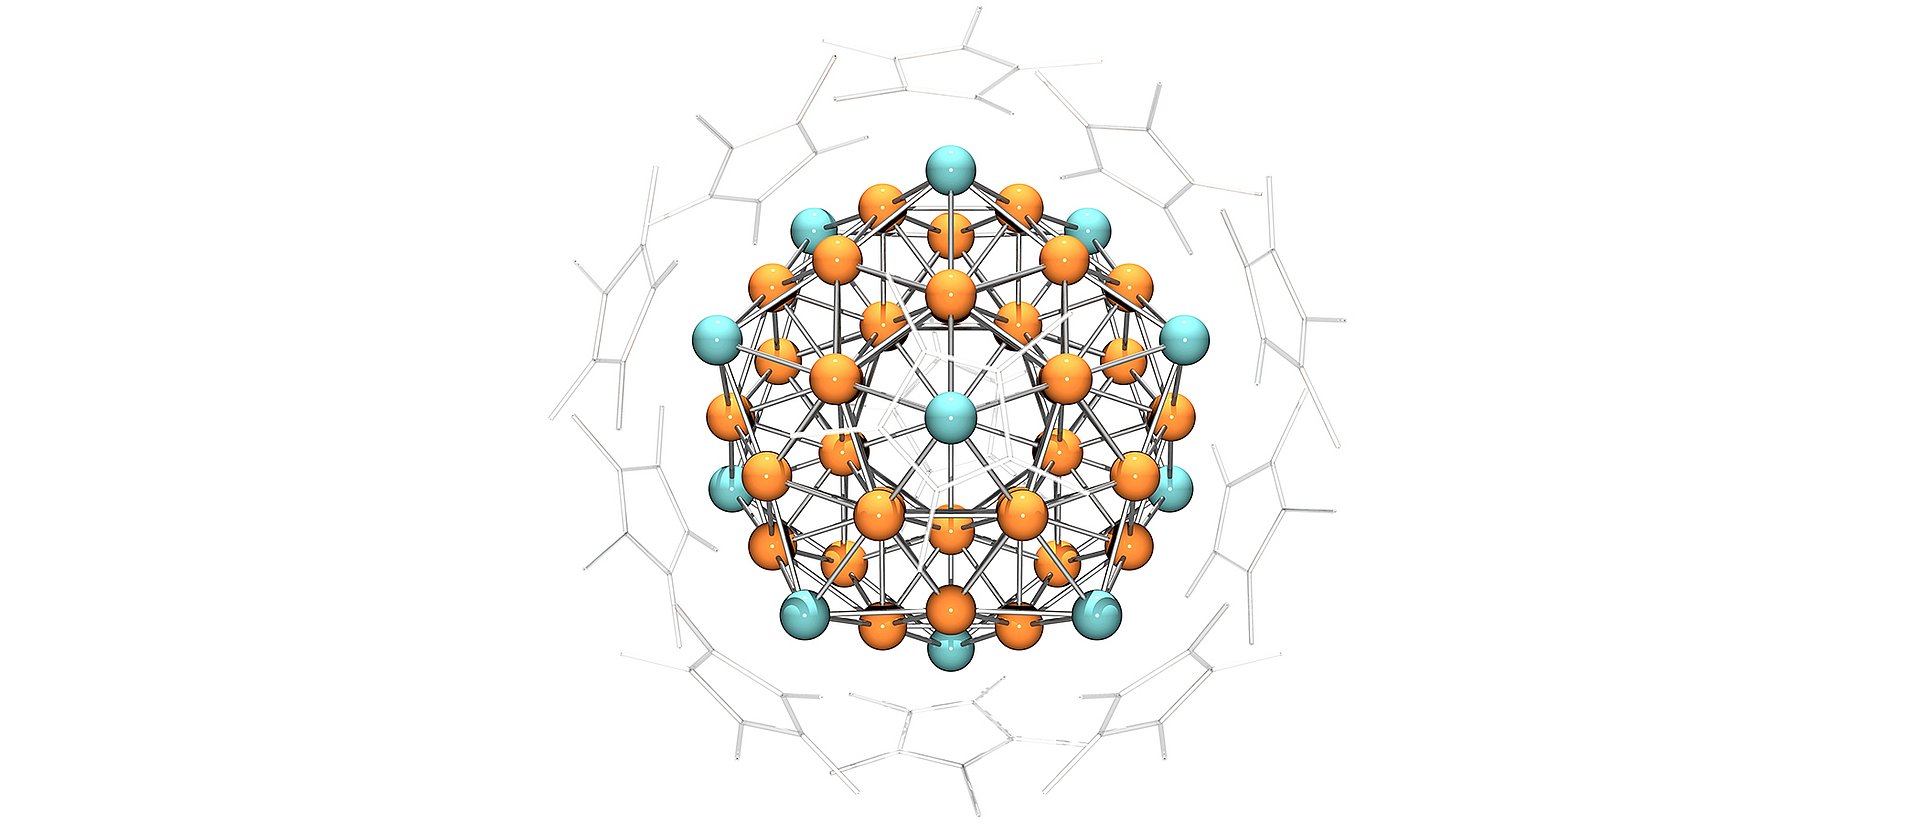 "Superatom" comprising 43 copper and 12 aluminum atoms surrounded by cyclopentatienyl ligands.